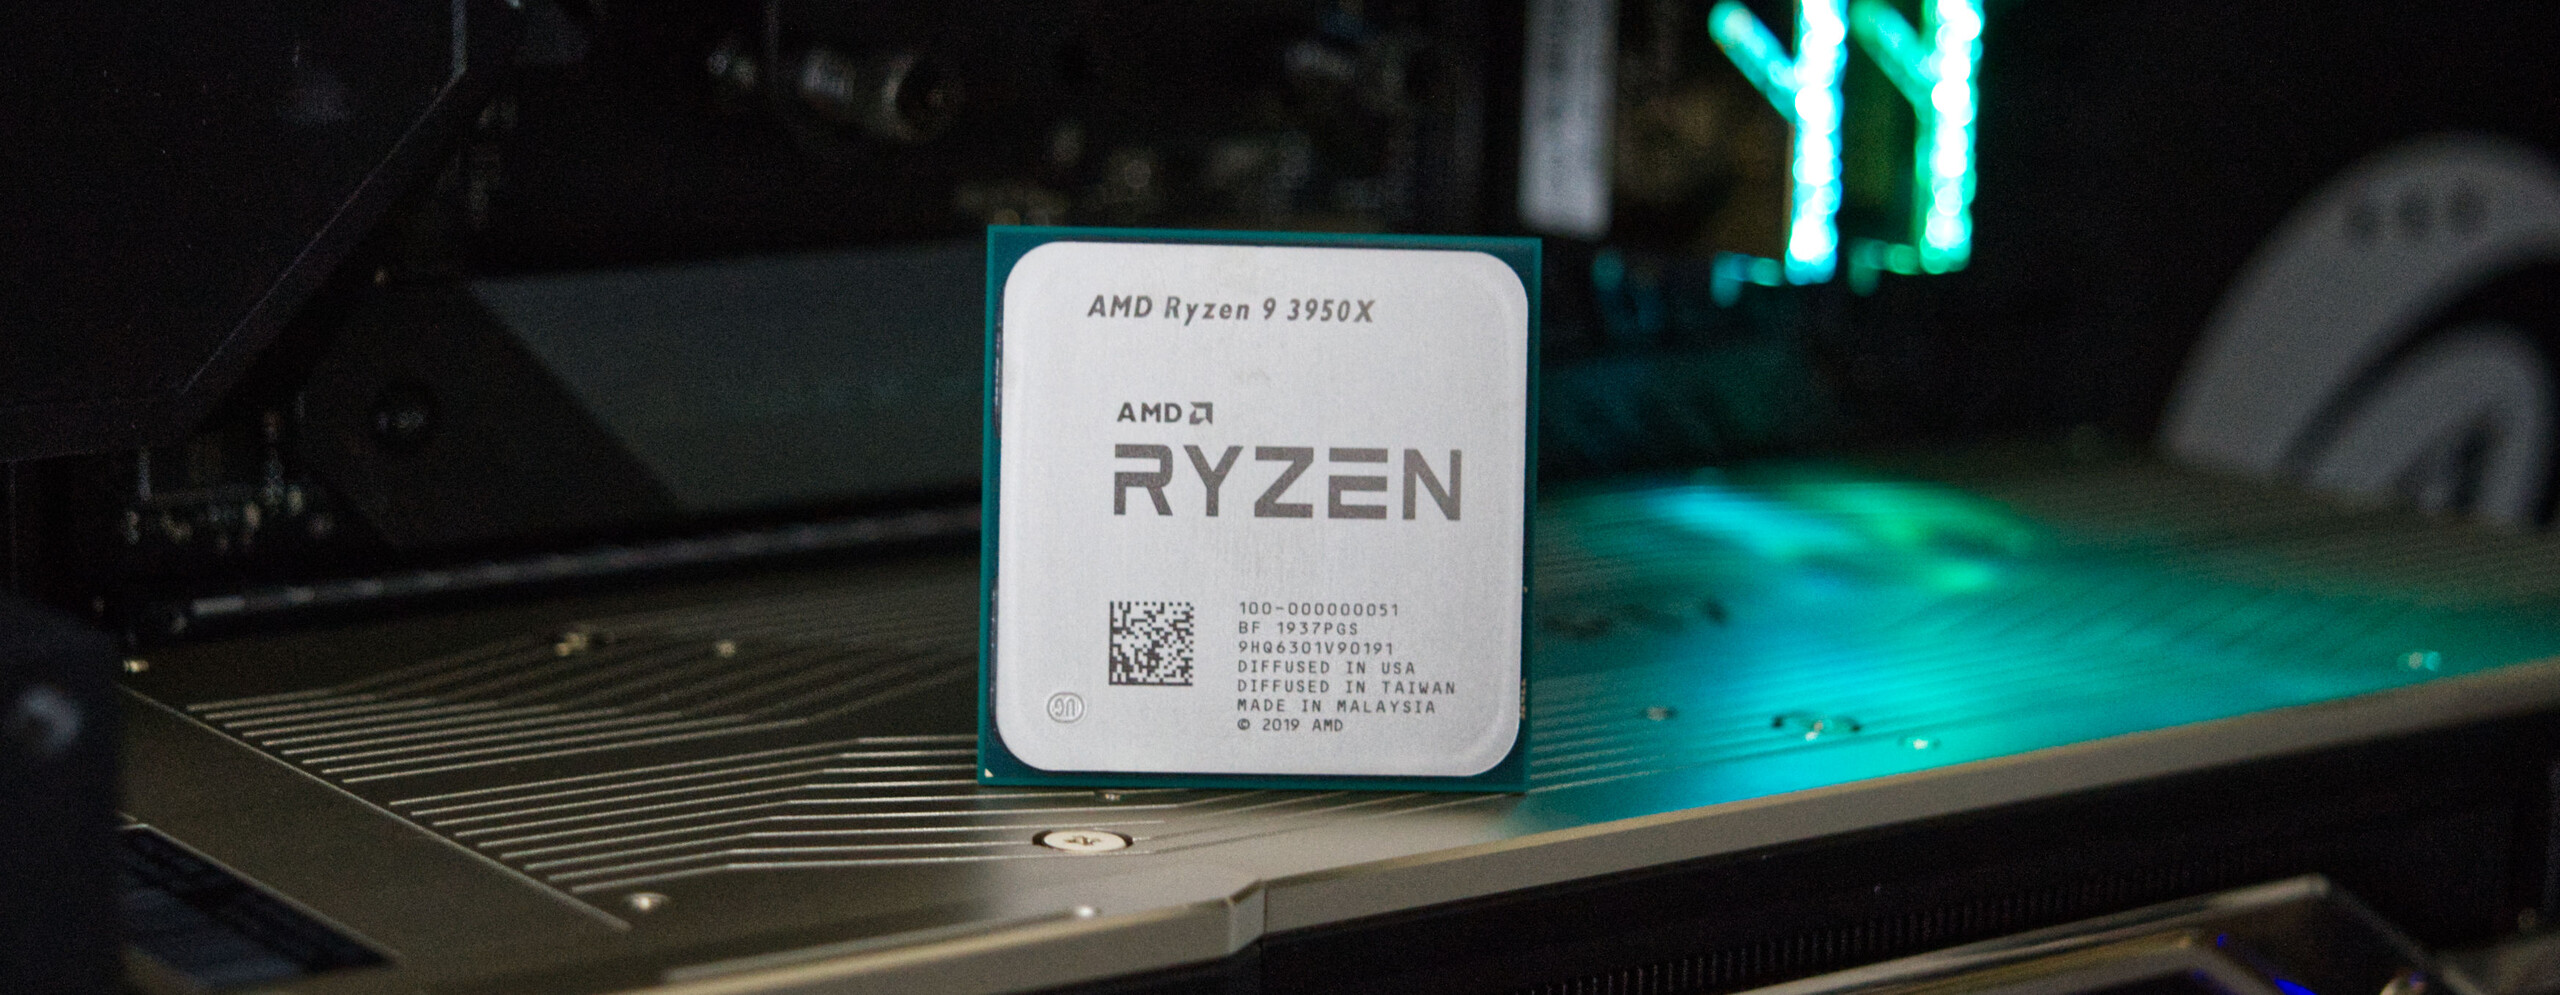 AMD Ryzen 9 3950X - The flagship for the AM4 socket in review